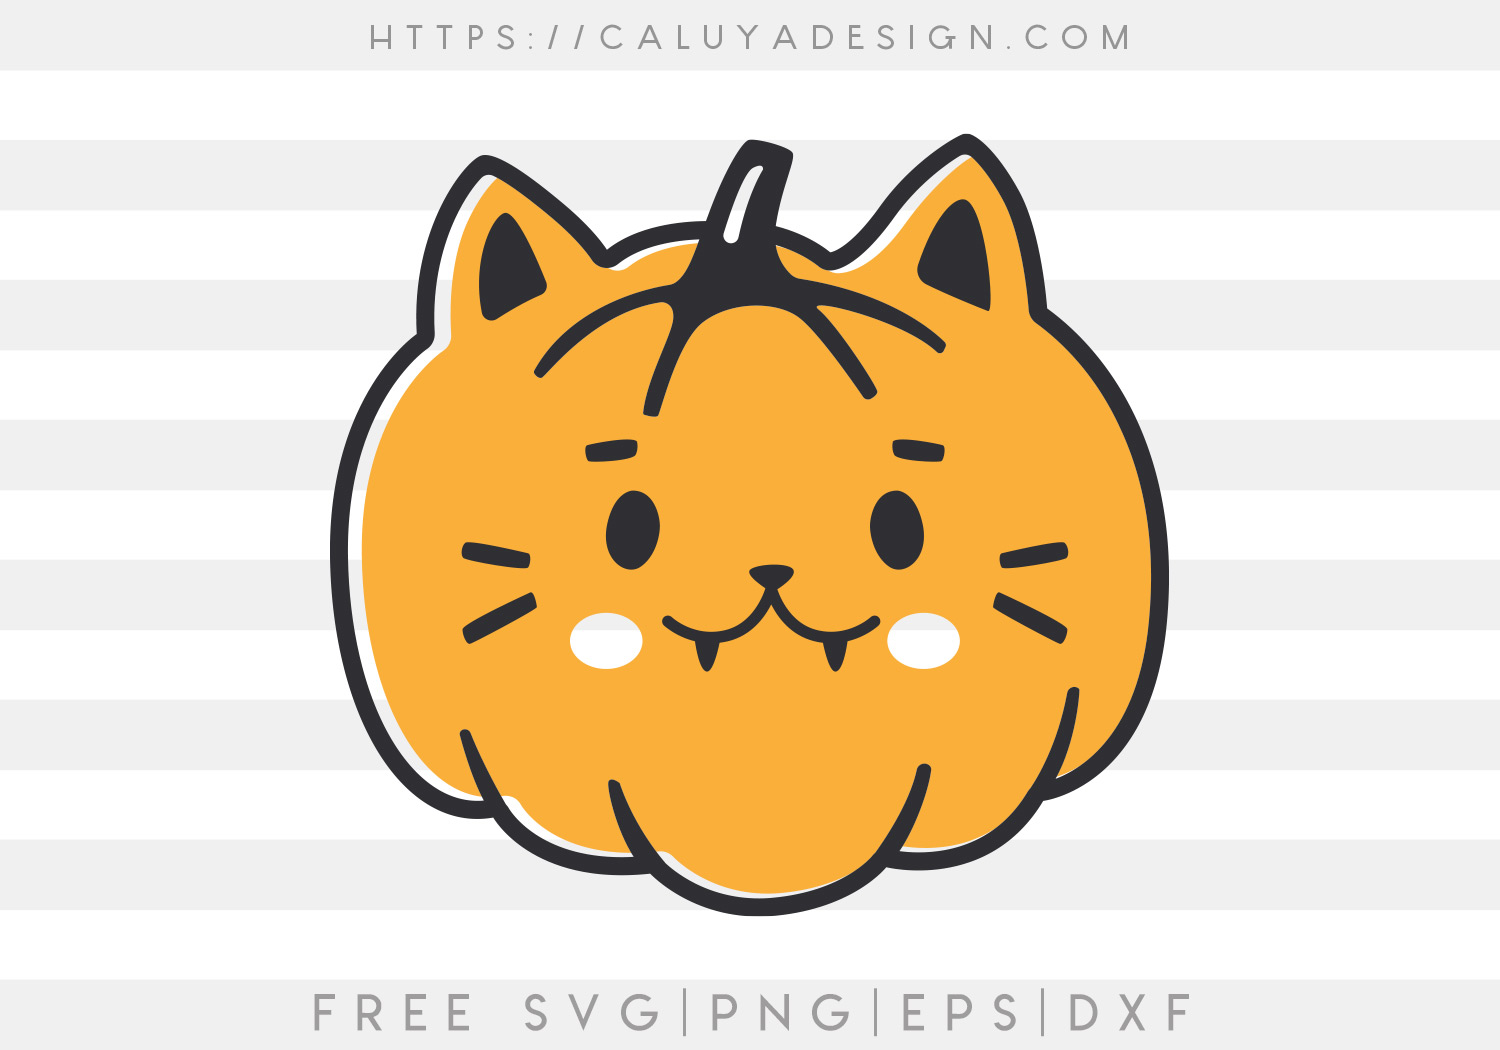 Pumpkin Kitty SVG, PNG, EPS & DXF